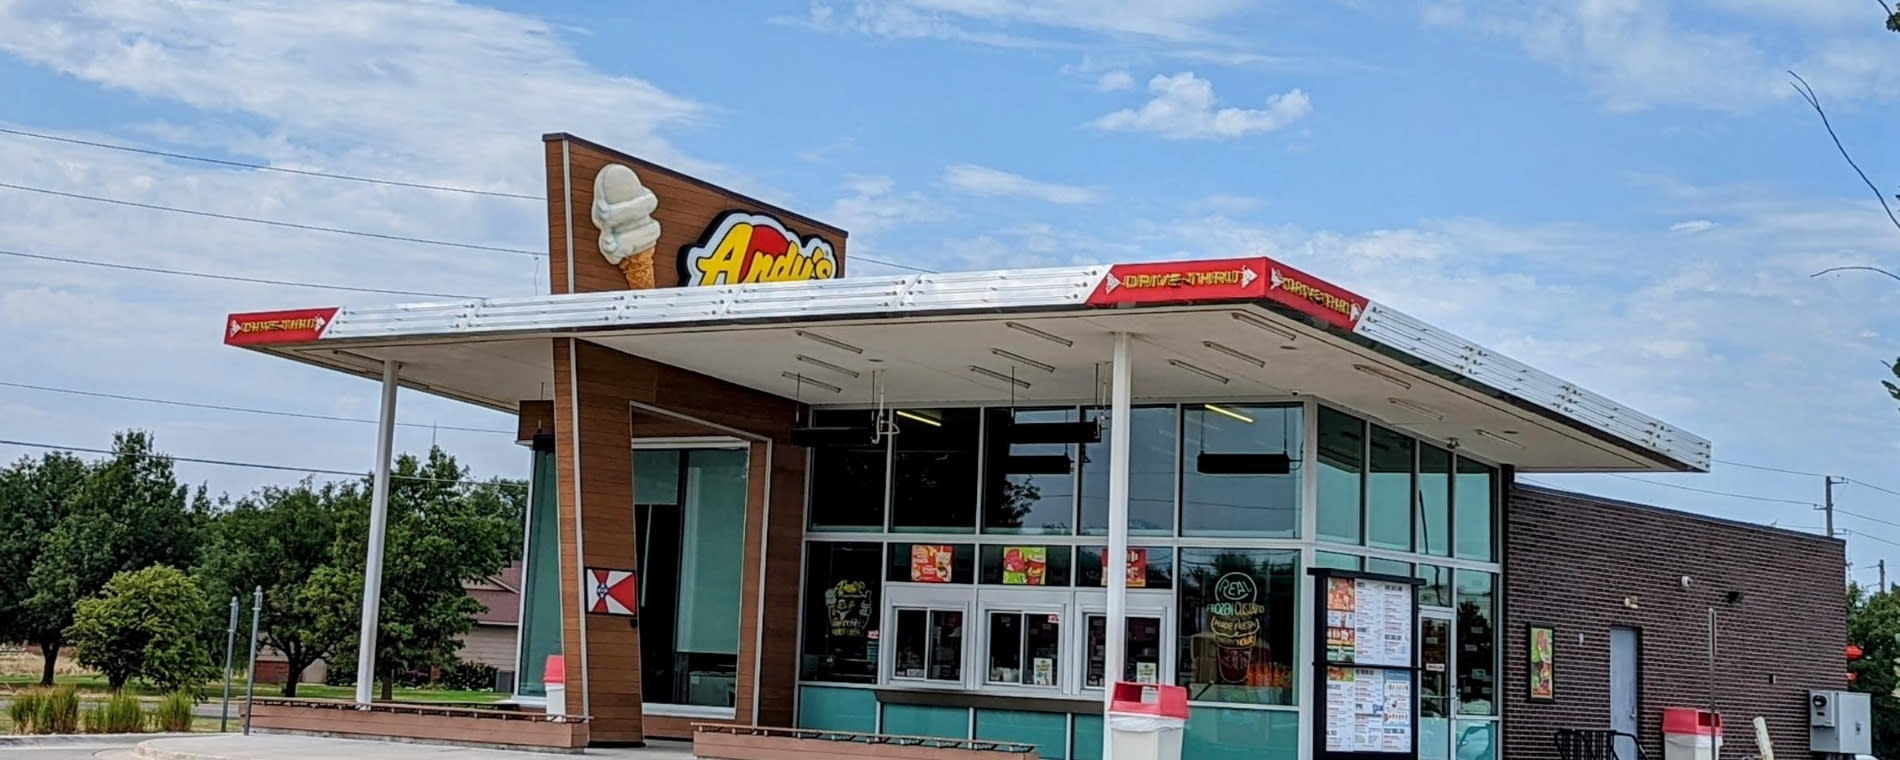 Andy's Frozen Custard West only exterior partner provided Visit Wichita